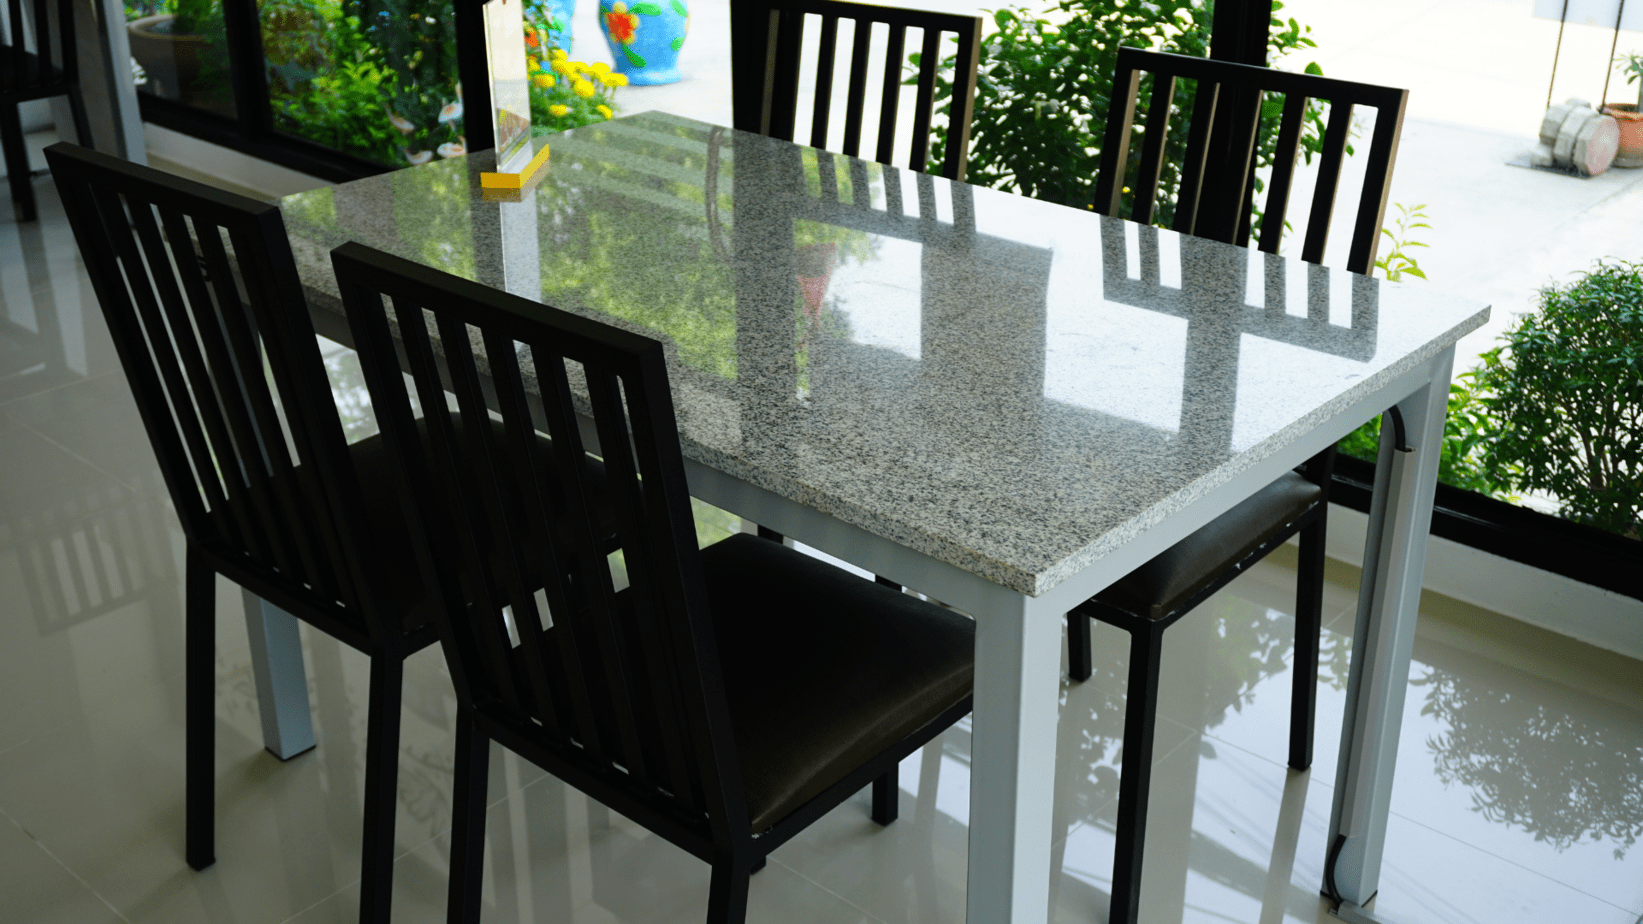 kitchen table base for granite top